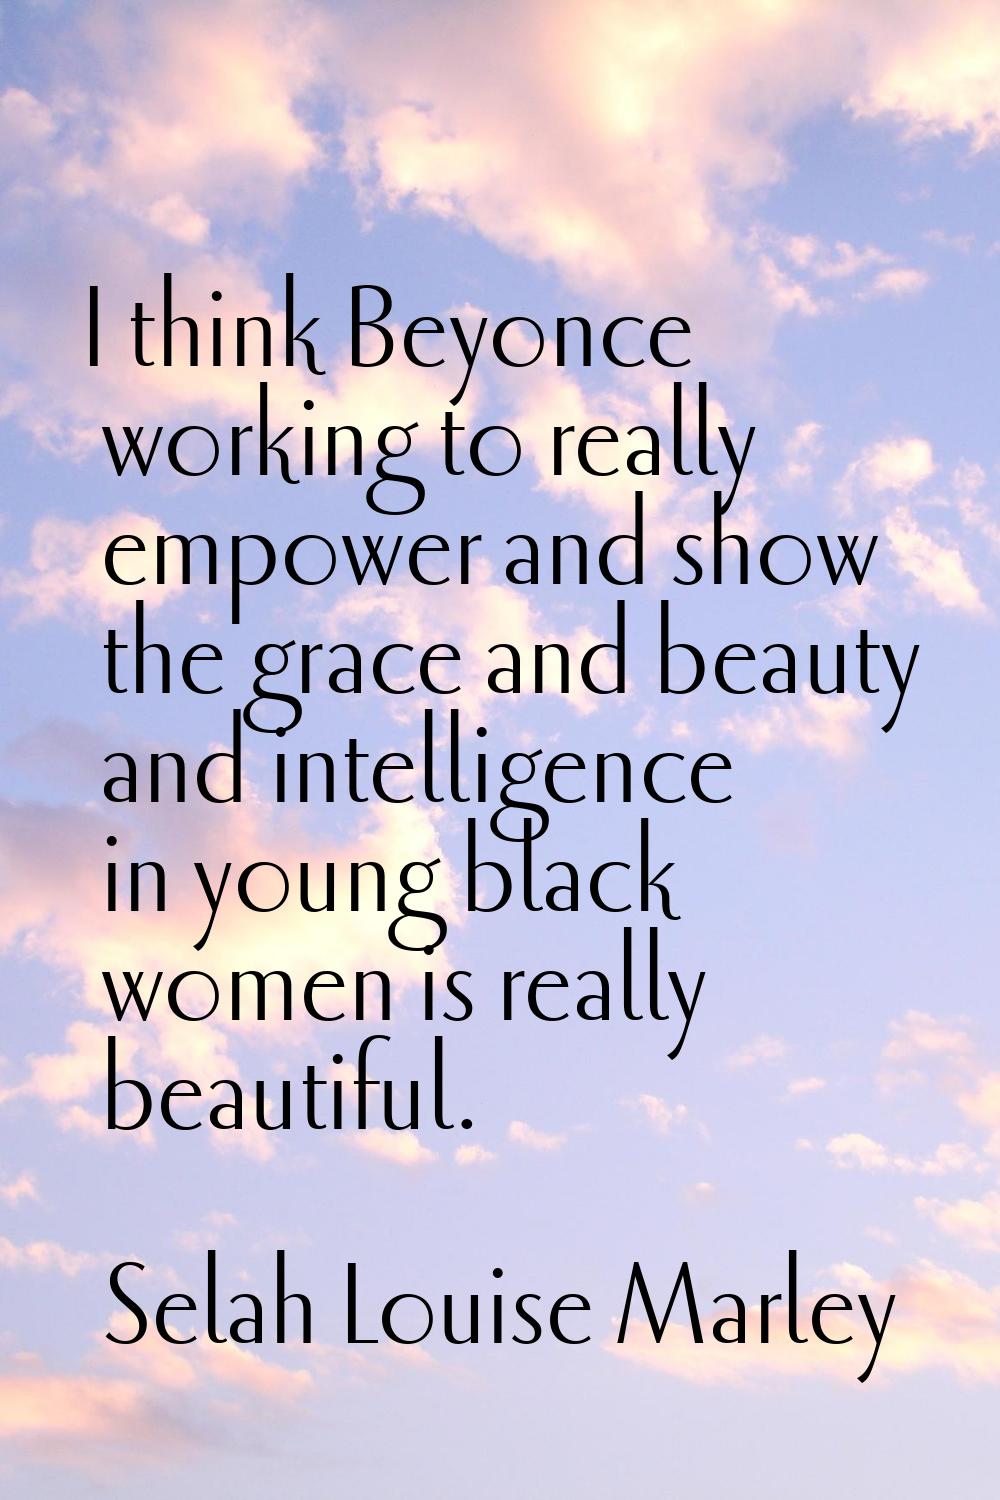 I think Beyonce working to really empower and show the grace and beauty and intelligence in young b